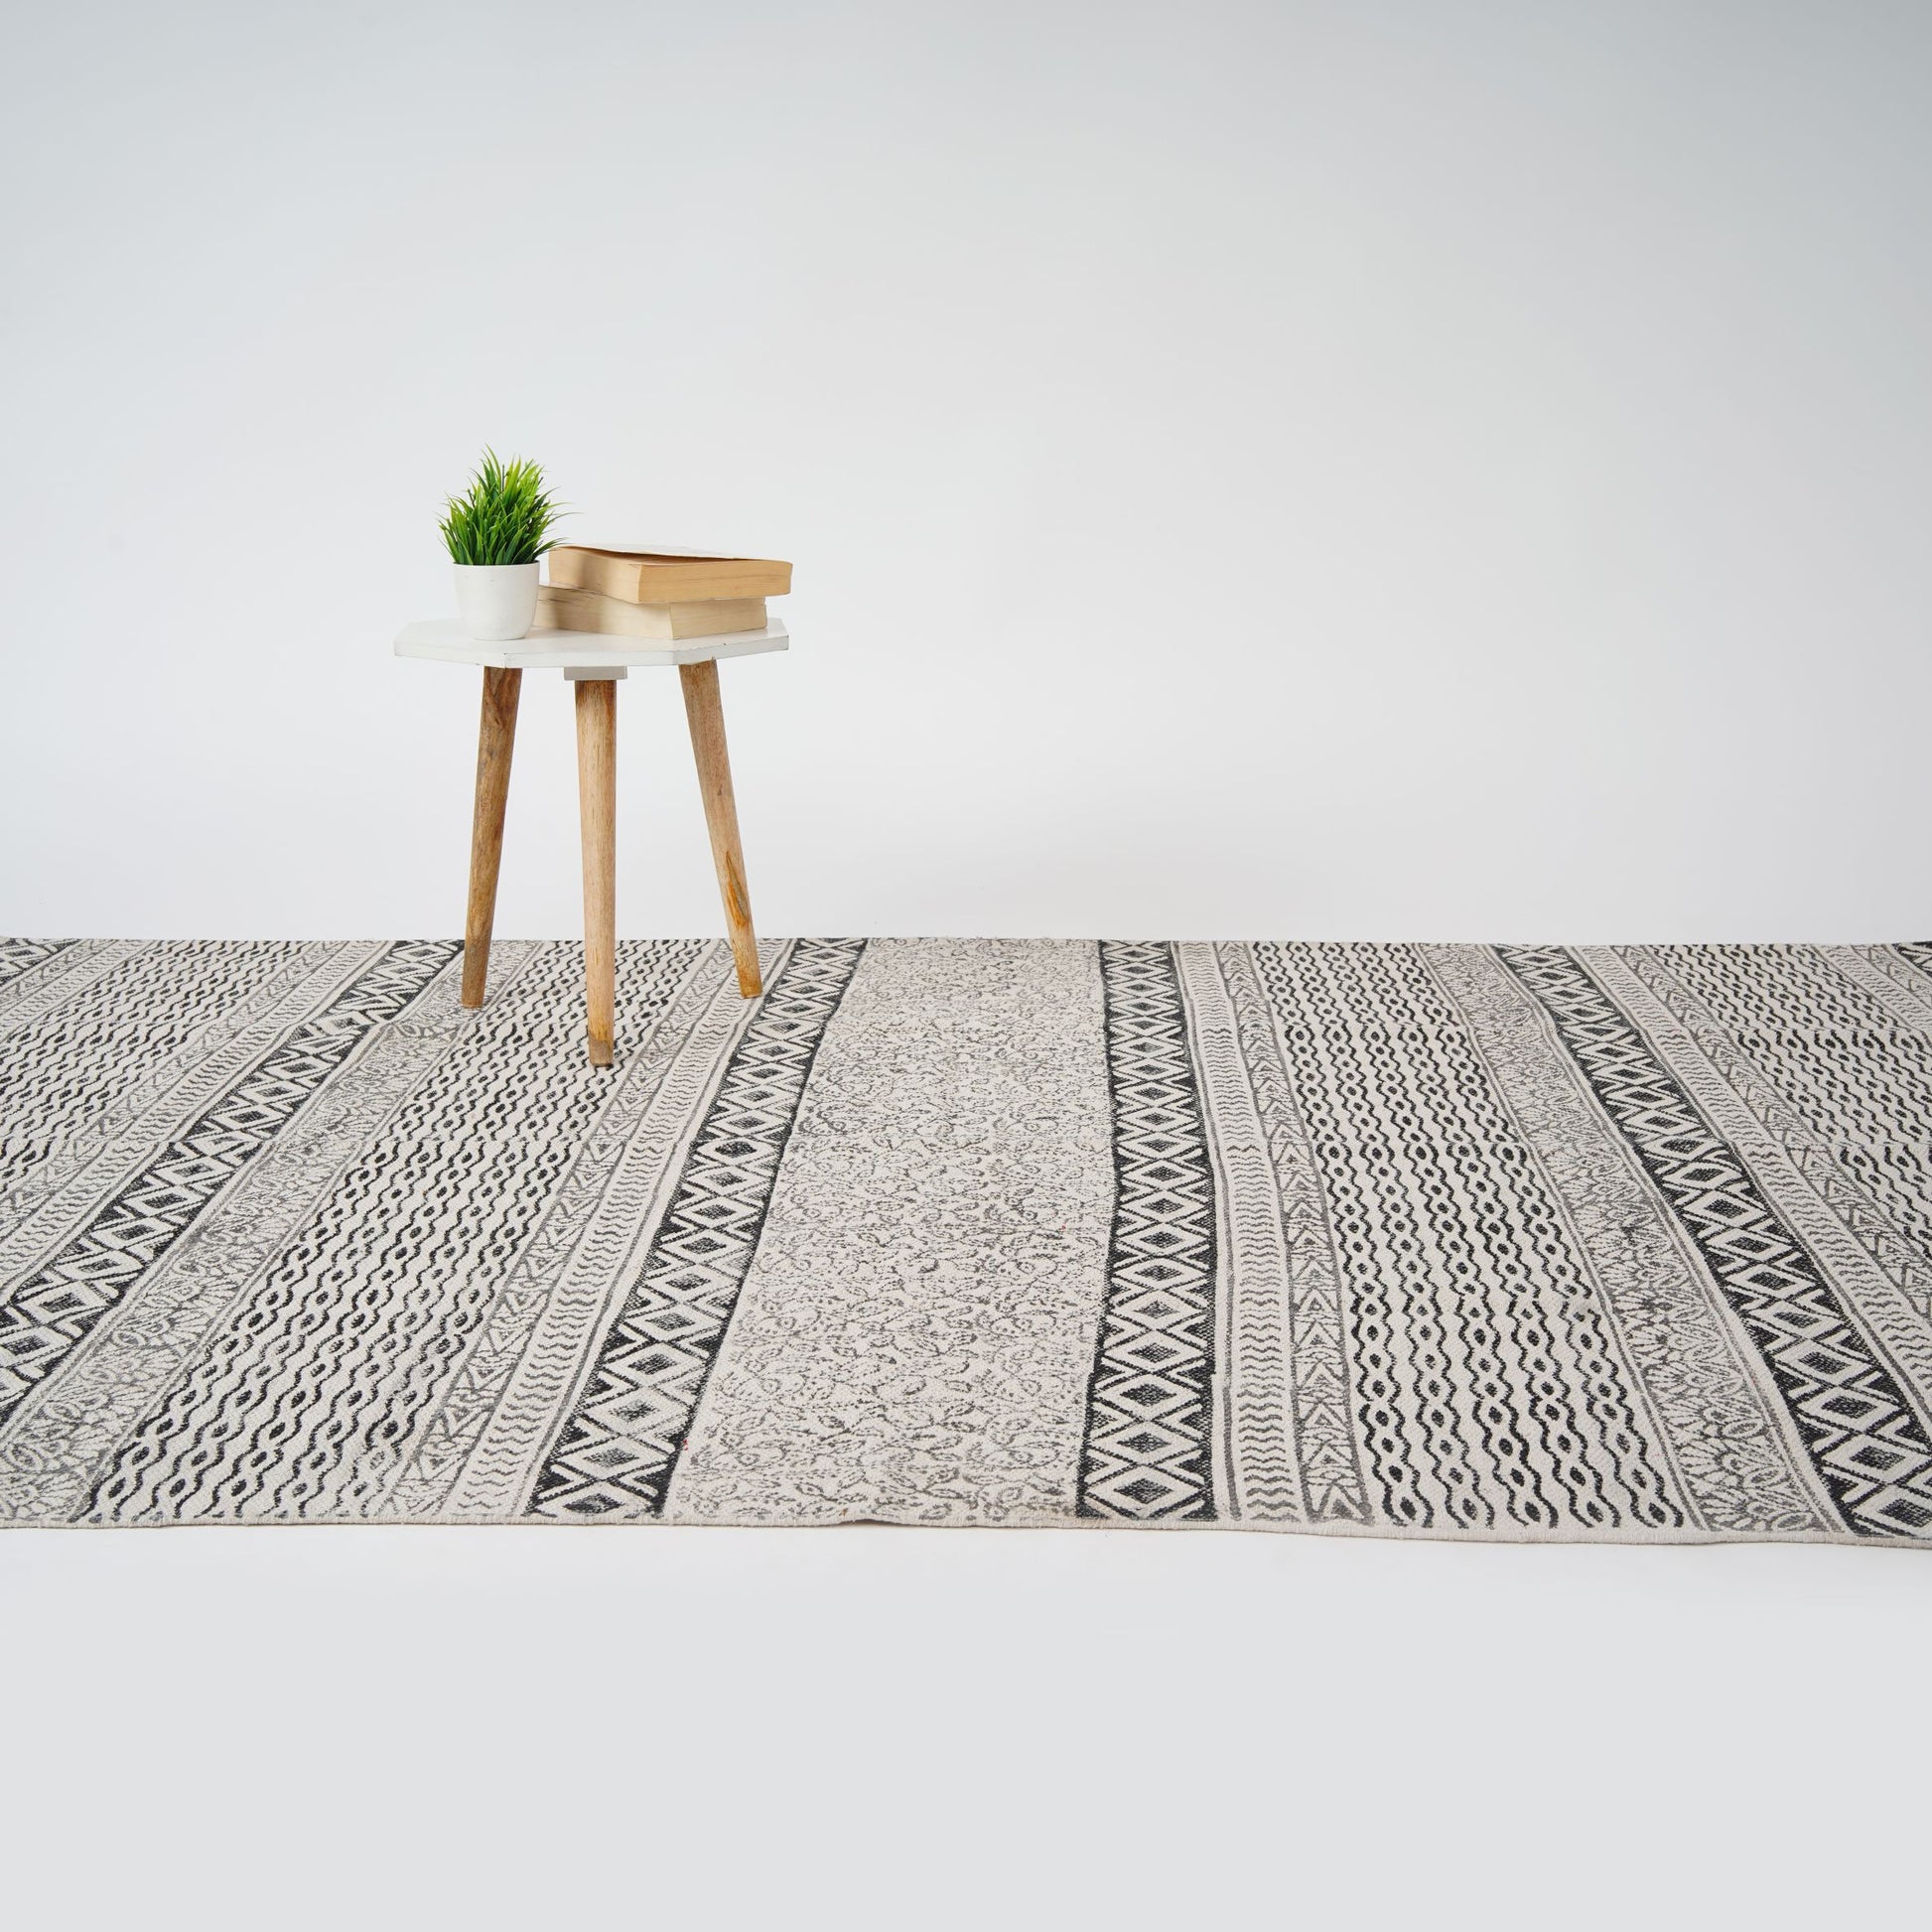 4 x 6 ft Cotton Area Rug Printed -B&W2 - The Teal Thread